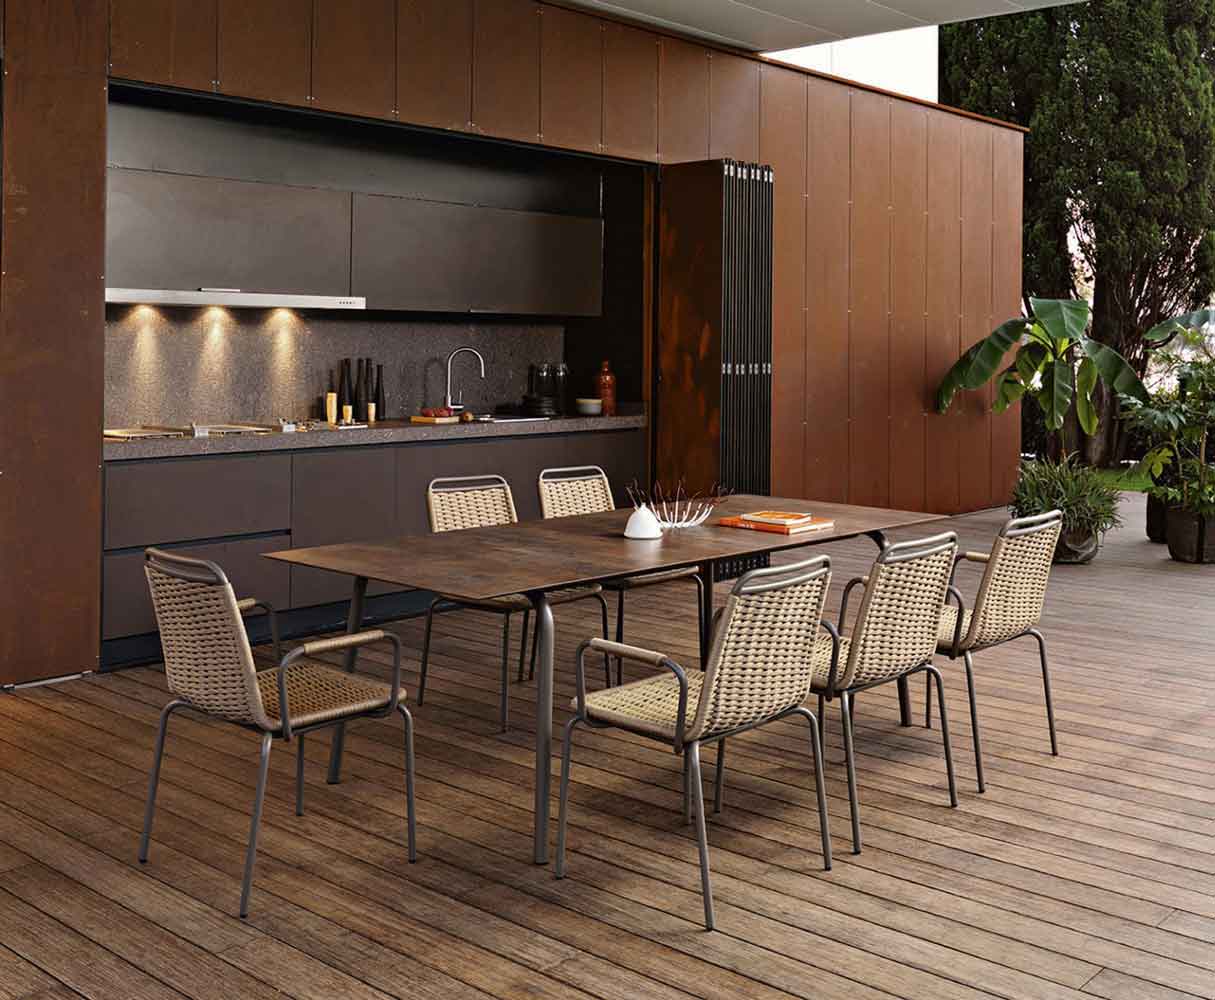 dinning set for outdoor use, outdoor wooden table with chairs, walnut table for outdoor use, high resistance to sun and water outdoor table, dinning set, trapezi me karekles gia exoteriko xoro, karekles me trapezi megalo exoterikou xorou